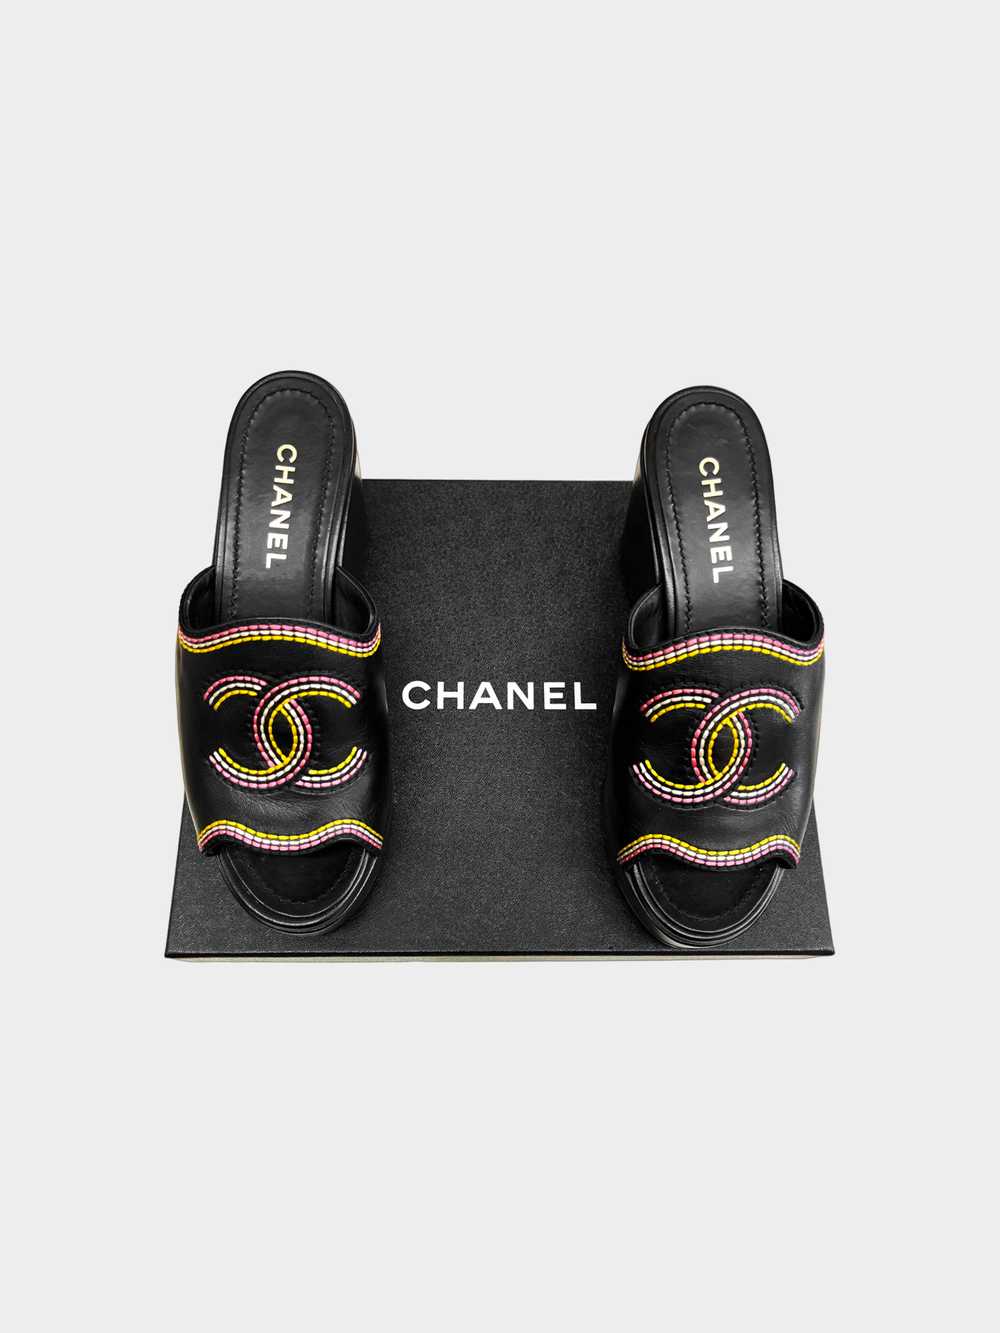 Chanel 2021 Multicolor Stitched CC Wedge Mules - image 3